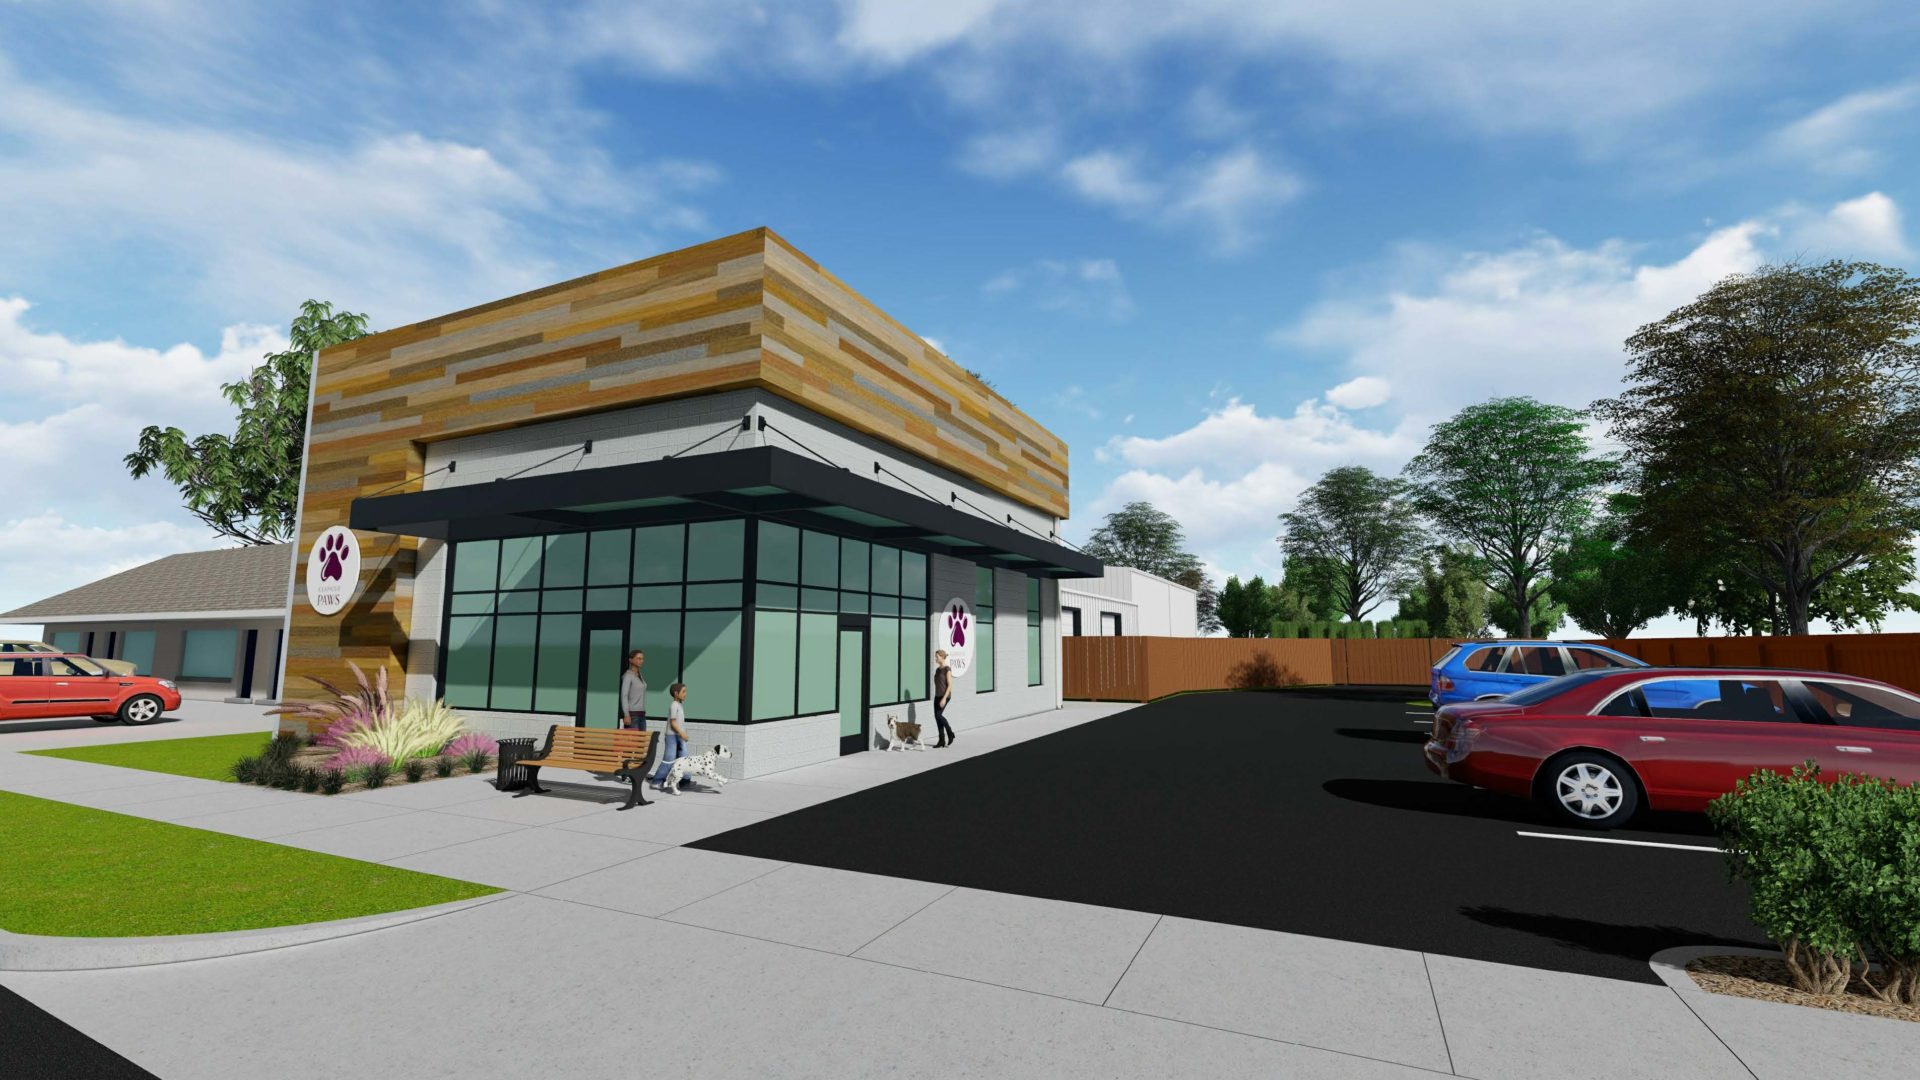 A exterior rendering of a new building with wooden siding, a bench outside, and a parking lot with cars